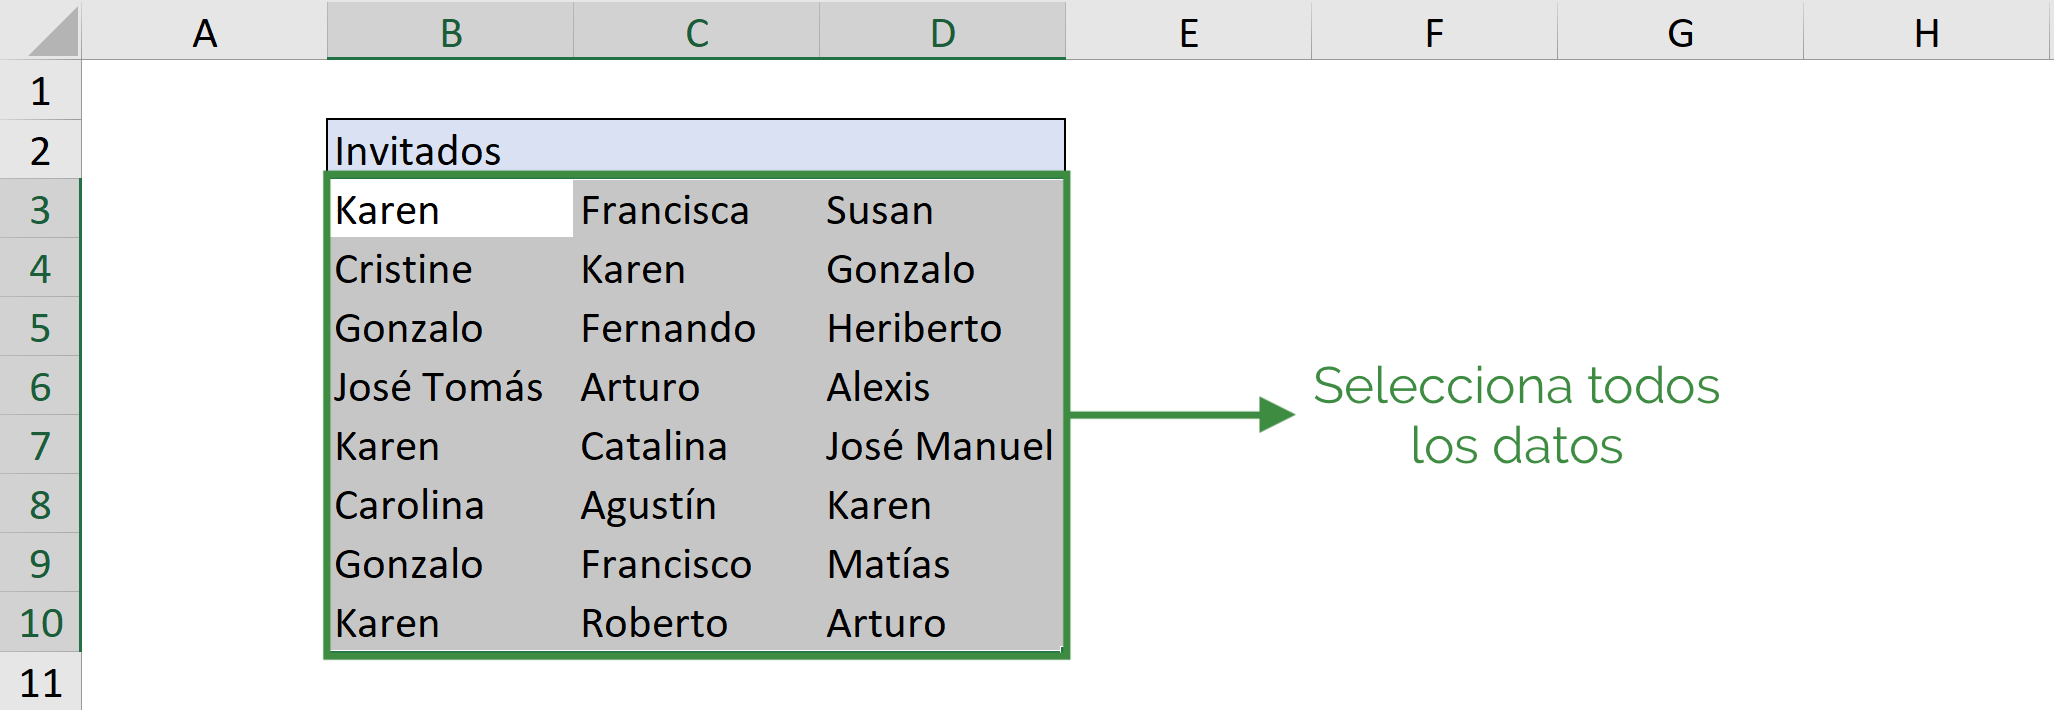 I select data to find duplicates in Excel